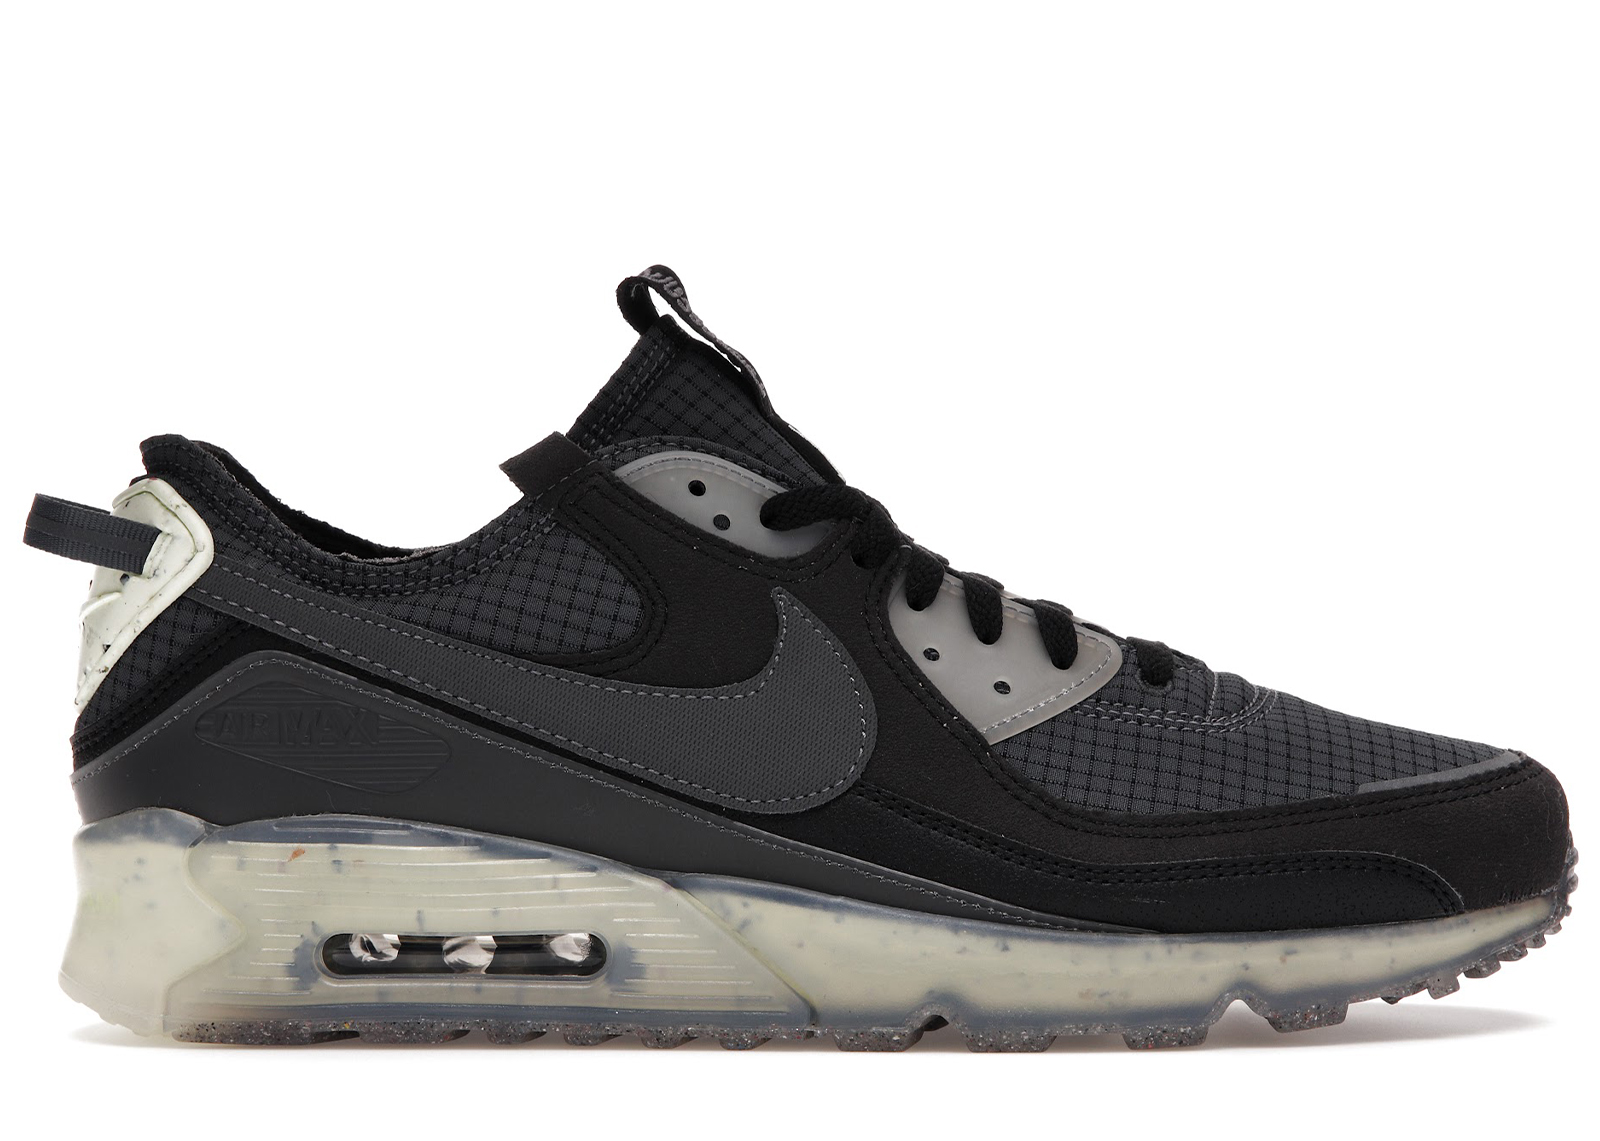 Nike Air Max 90 Terrascape Black Lime Ice Men's - DH2973-001 - US